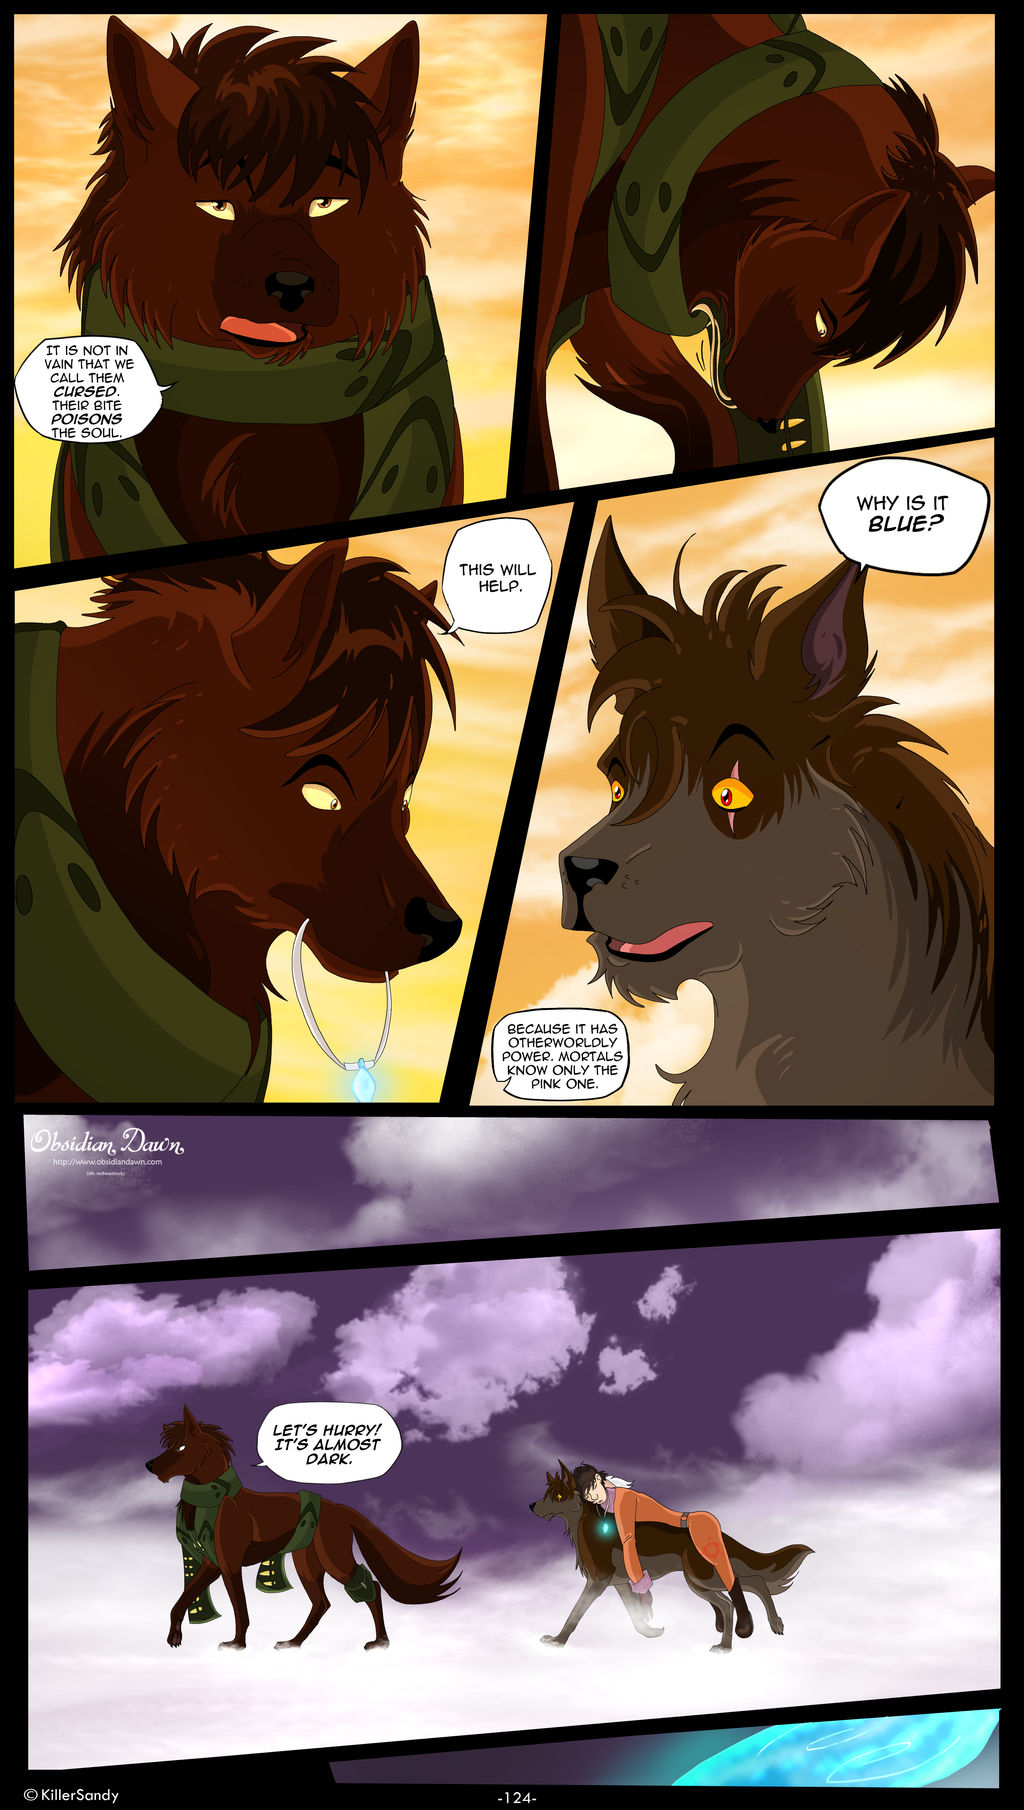 The Prince of the Moonlight Stone page 124